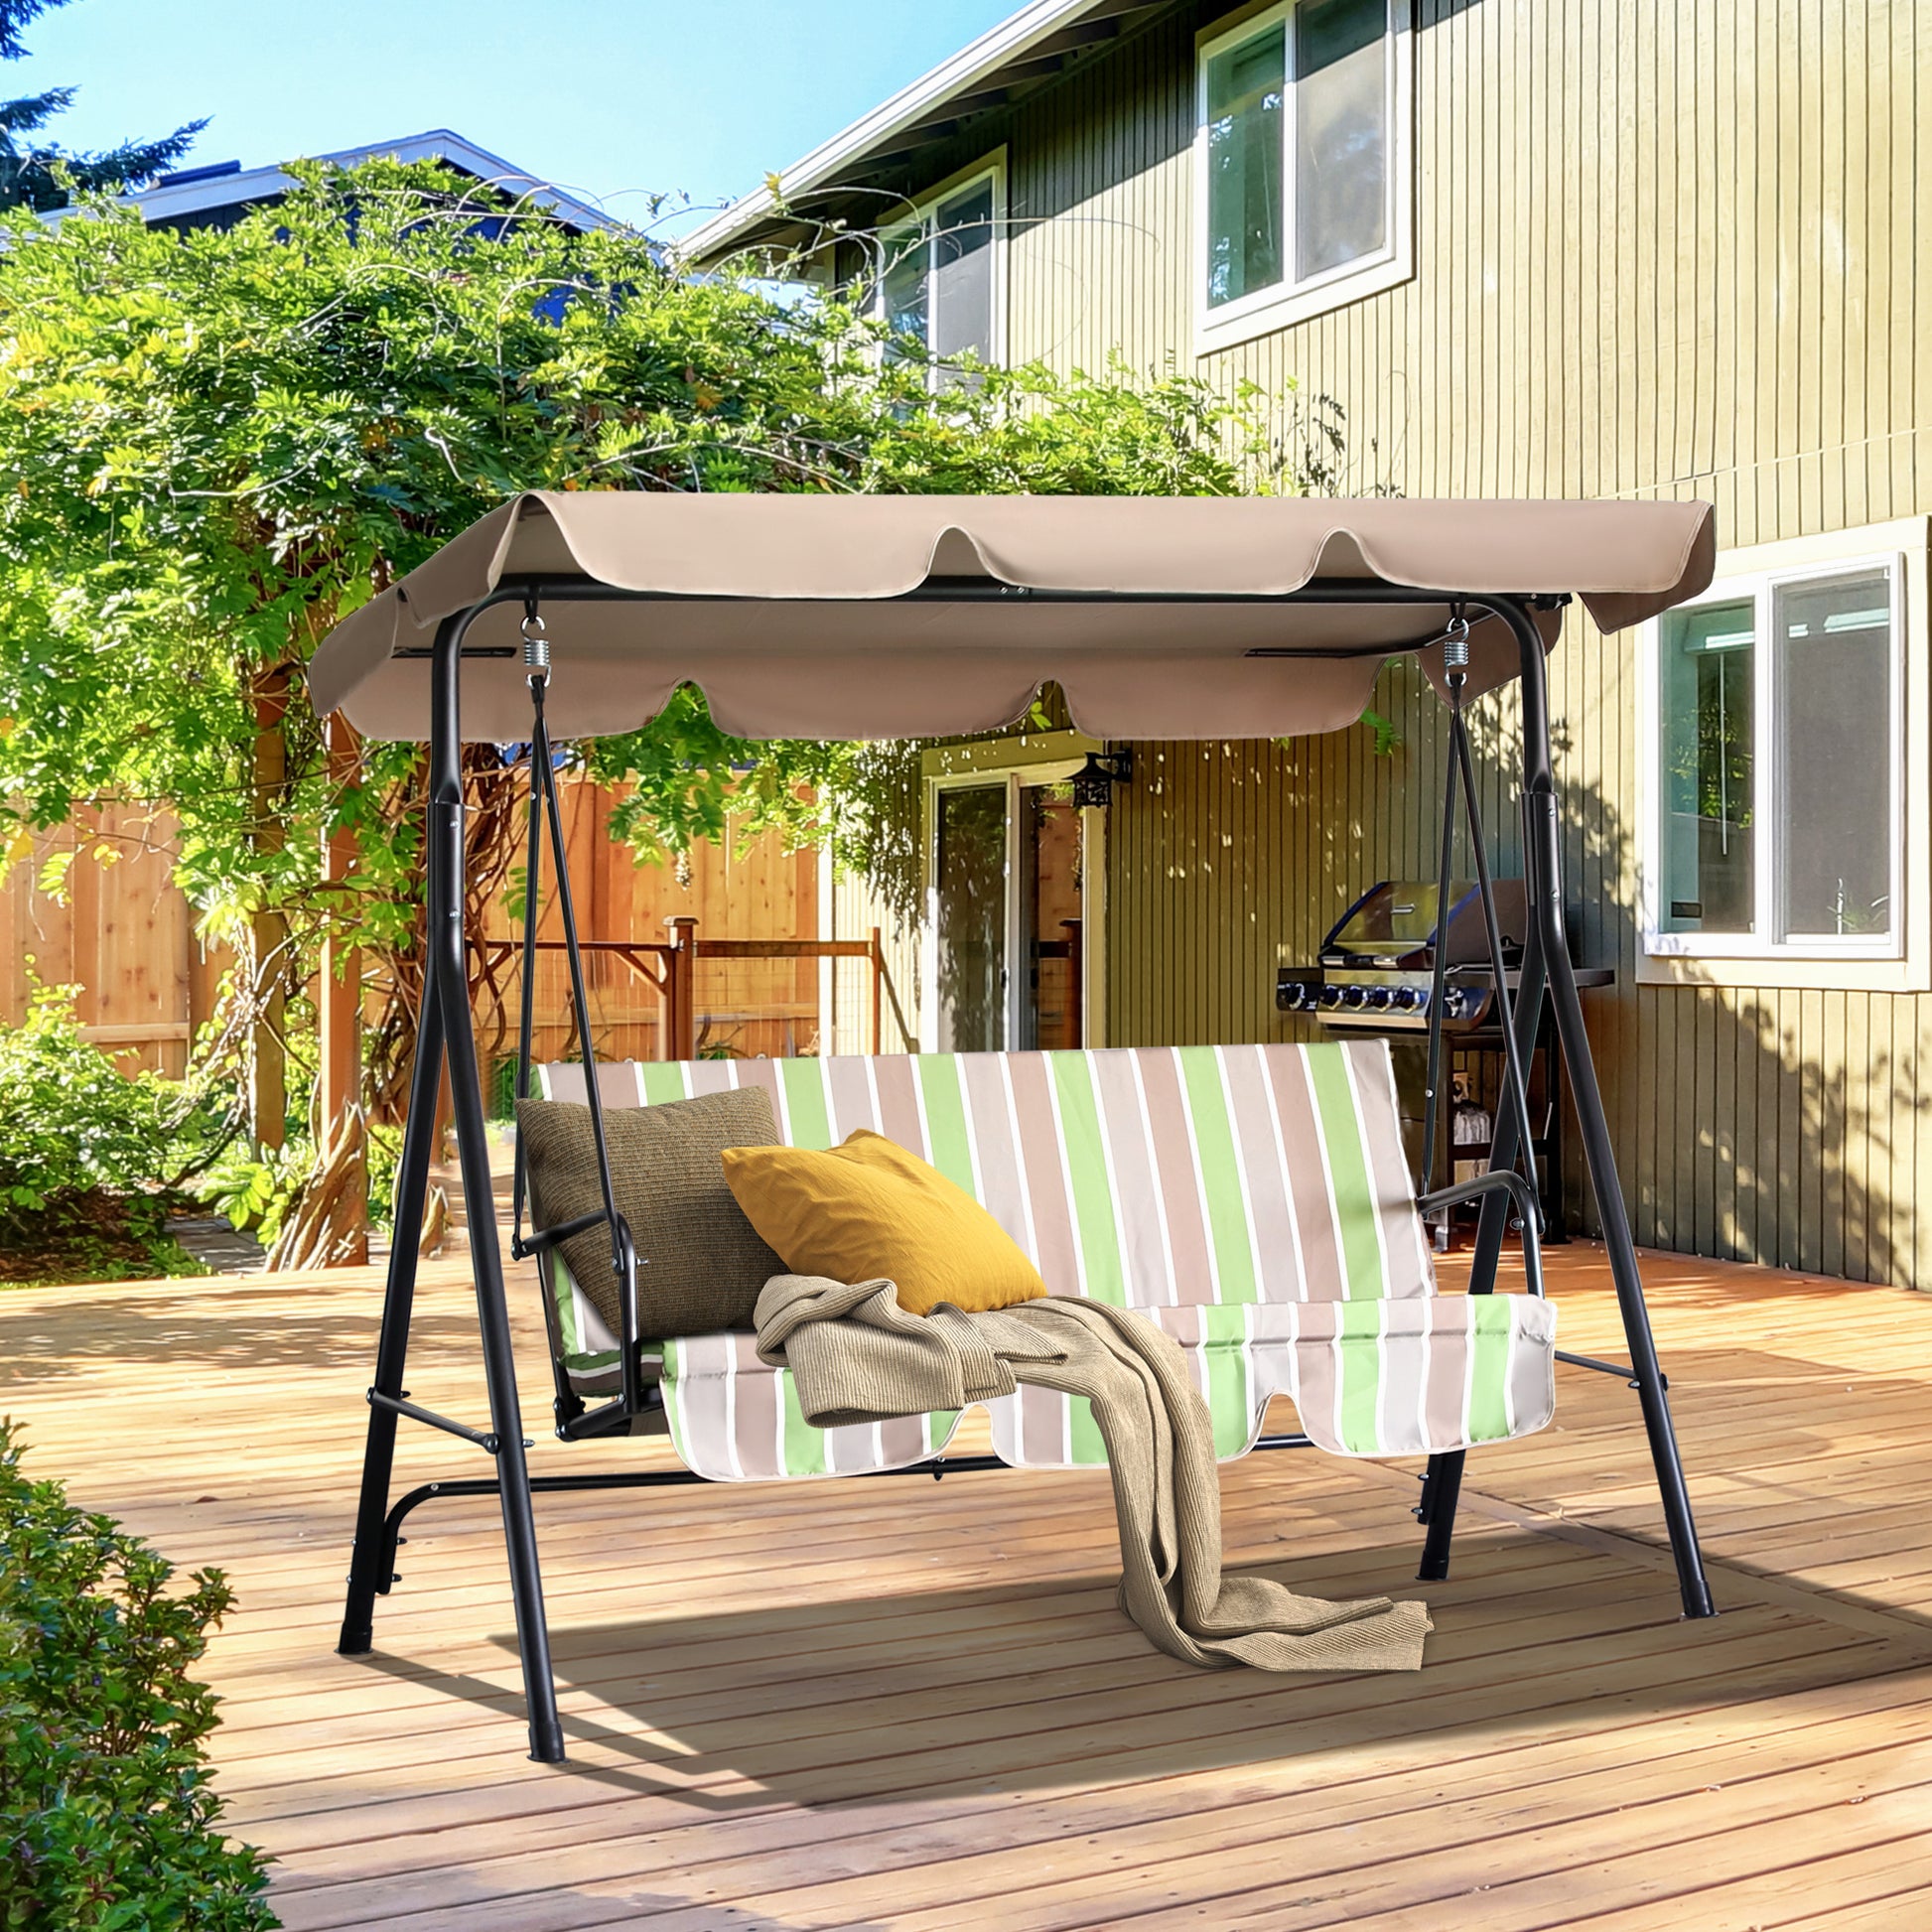 3-Seat Patio Swing Chair, Outdoor Porch Swing Glider with Adjustable Canopy, Removable Cushion, and Weather Resistant Steel Frame, for Garden, Poolside, Green Stripes at Gallery Canada